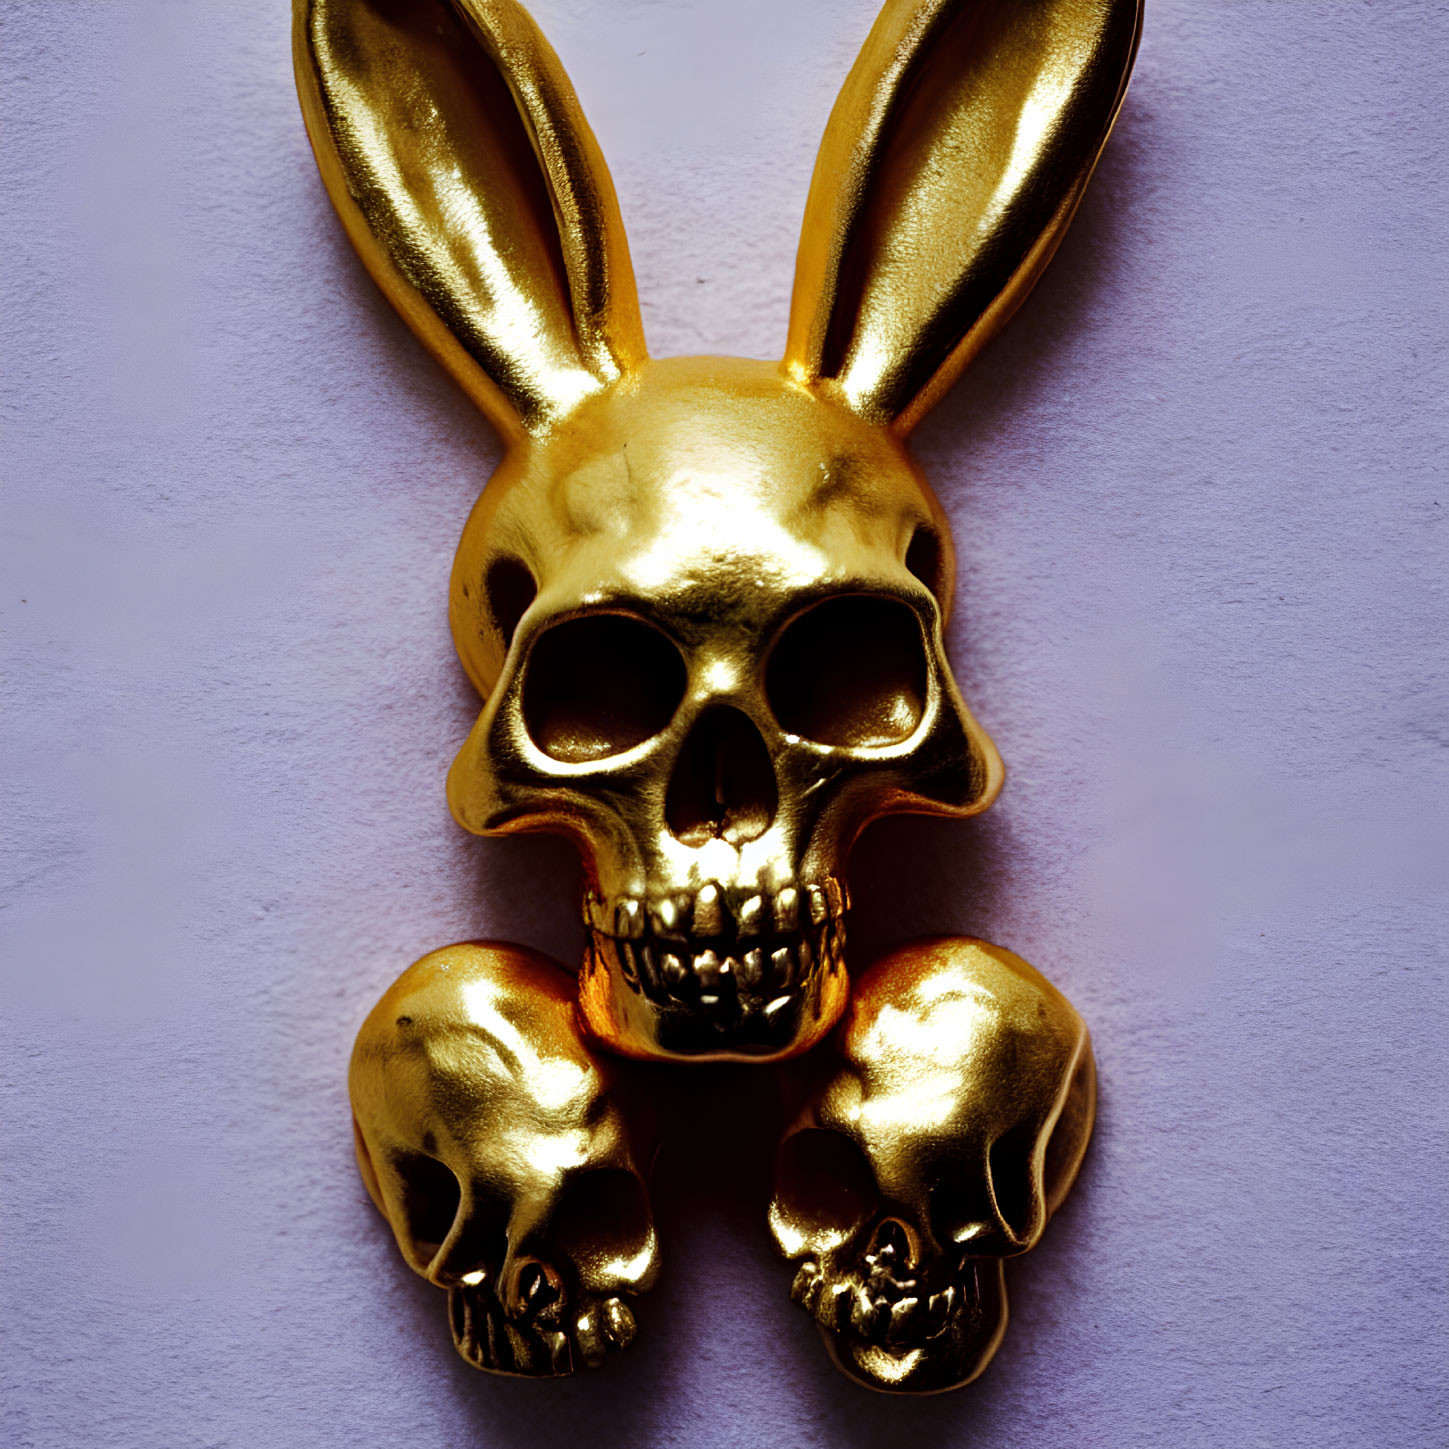 Gold Skull with Rabbit Ears and Skull Teeth on Purple Background